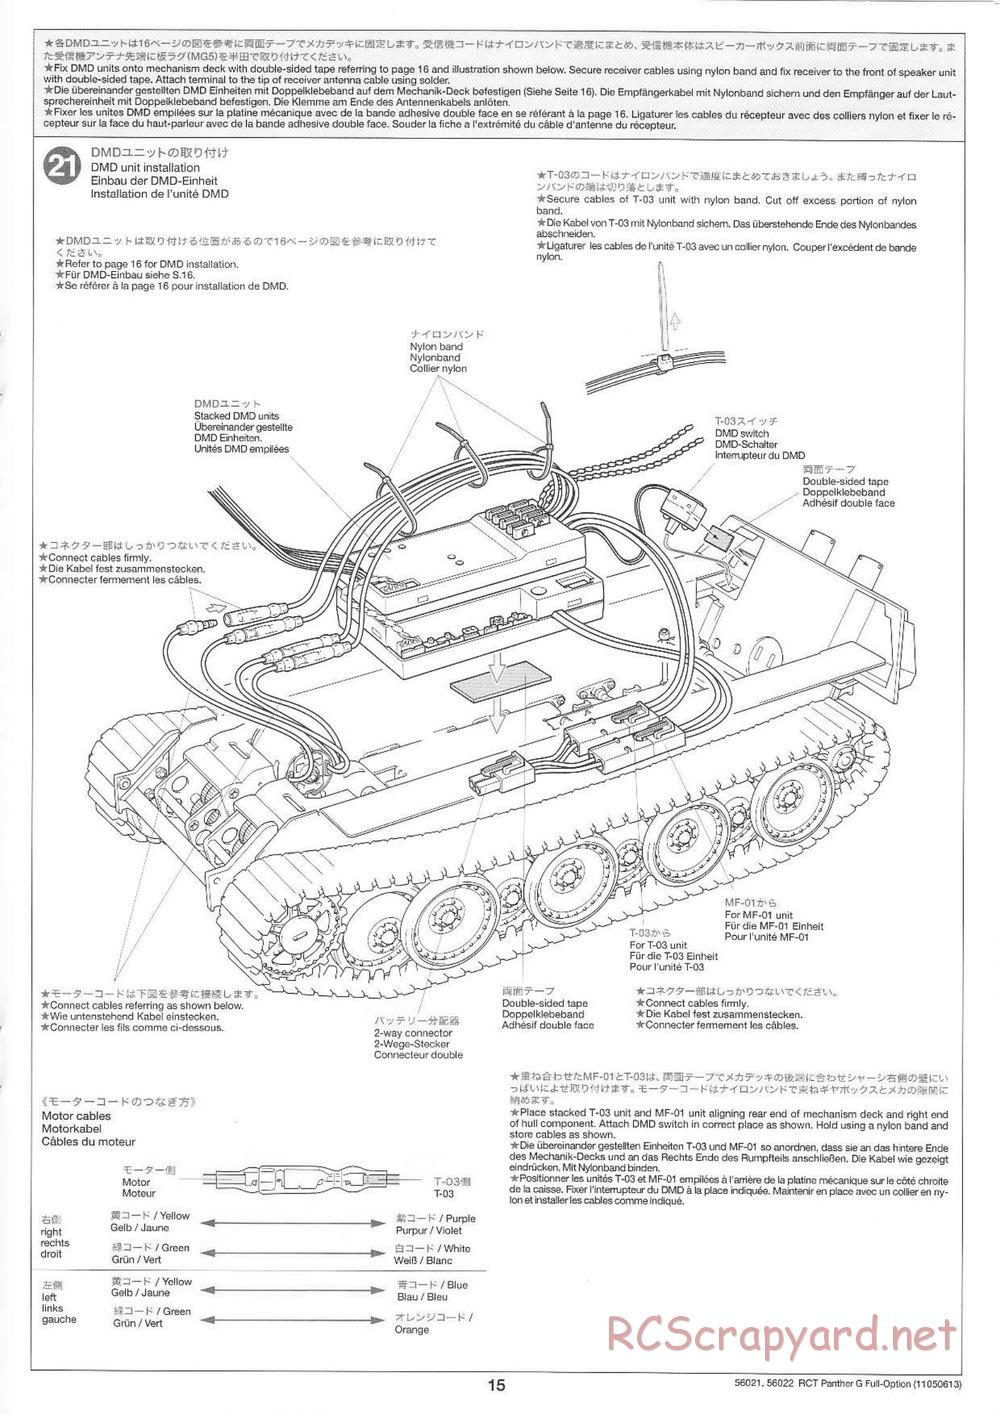 Tamiya - Panther Type G - 1/16 Scale Chassis - Manual - Page 15